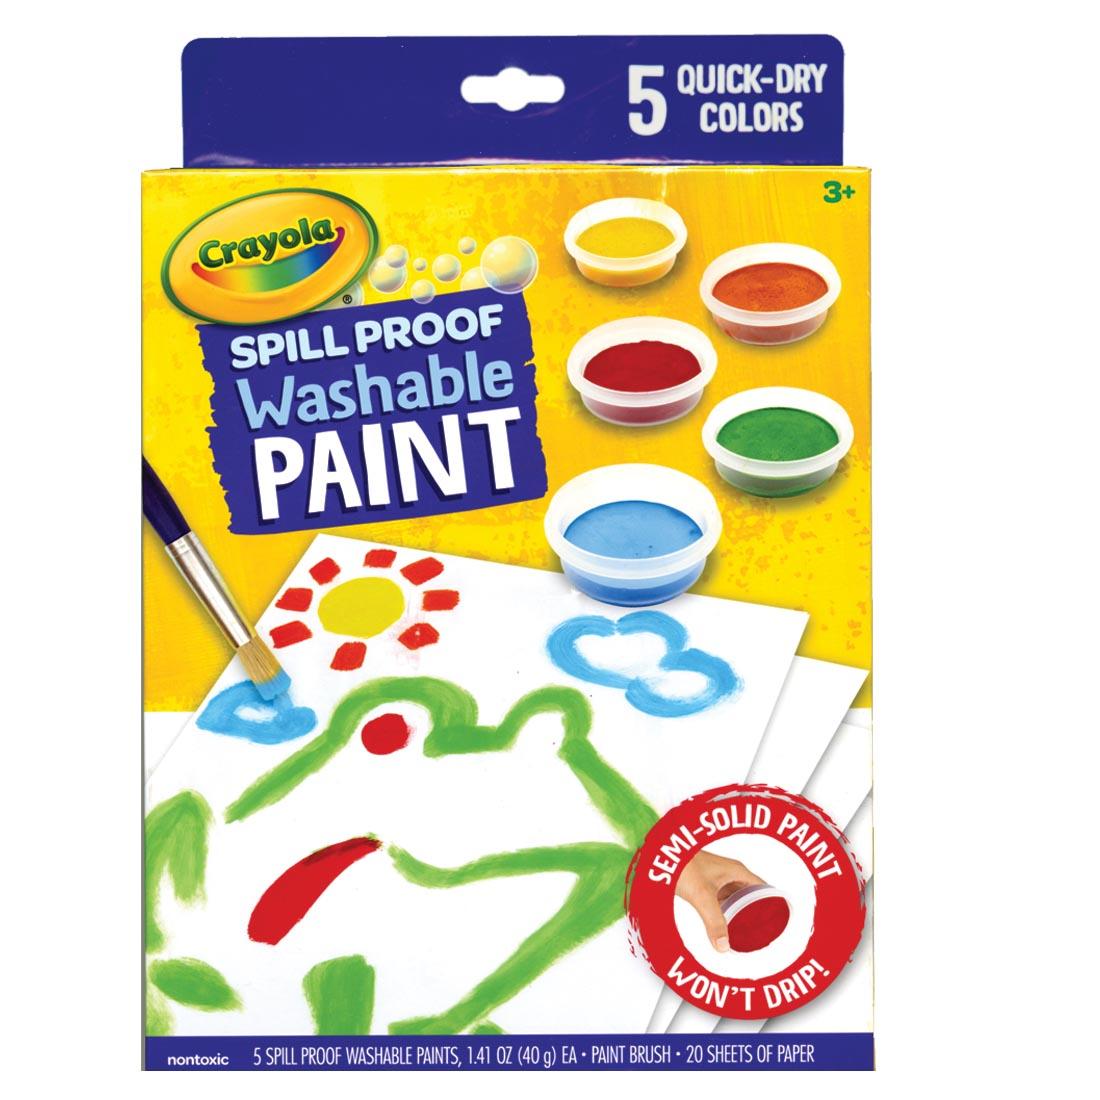 Package of Crayola Spill Proof Washable Paint